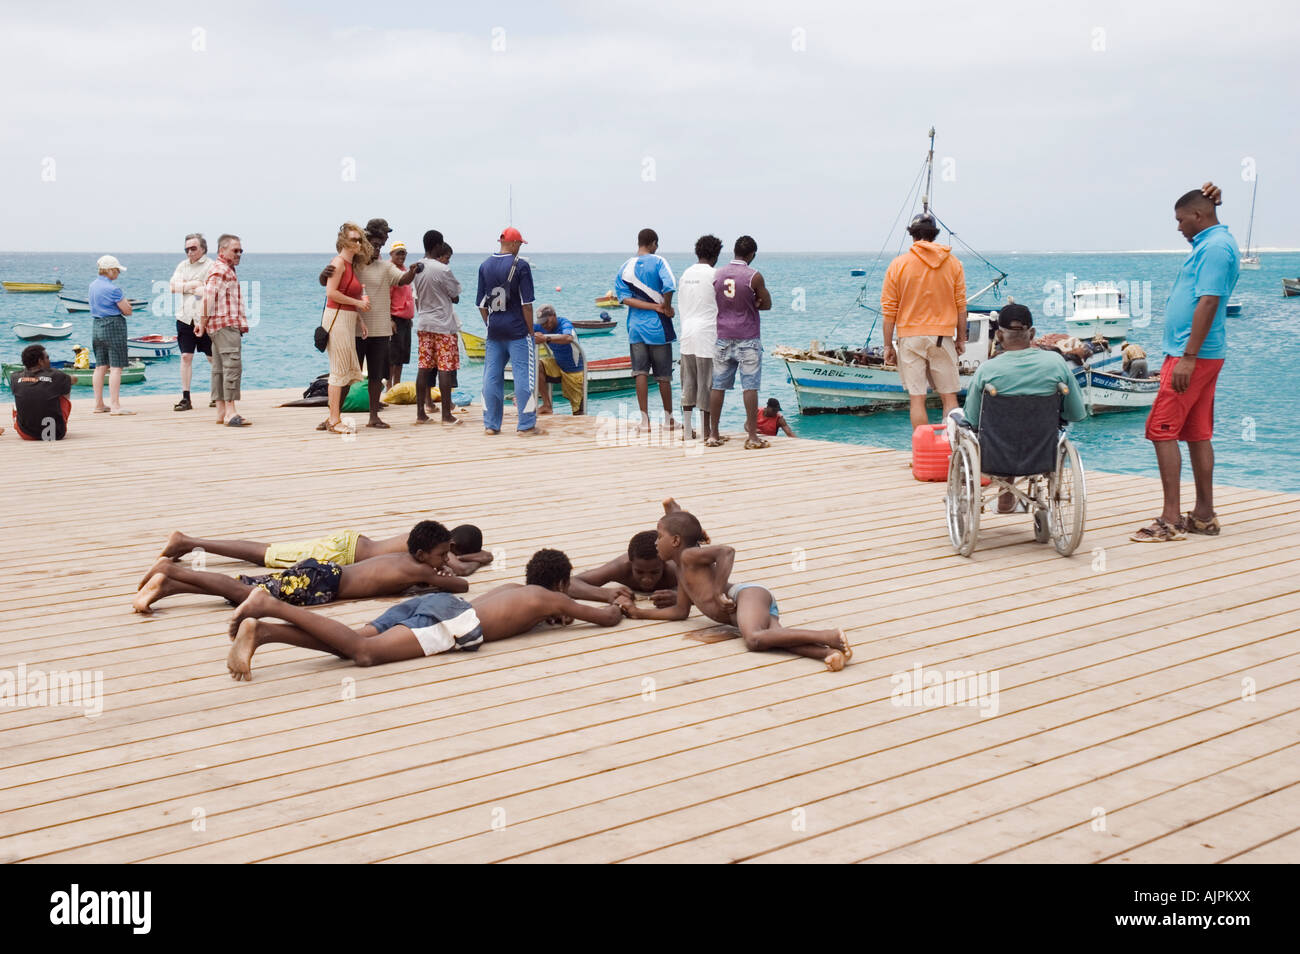 Colour landscape image of tourists and locals on the pier in 'santa maria', cape verde islands. Stock Photo